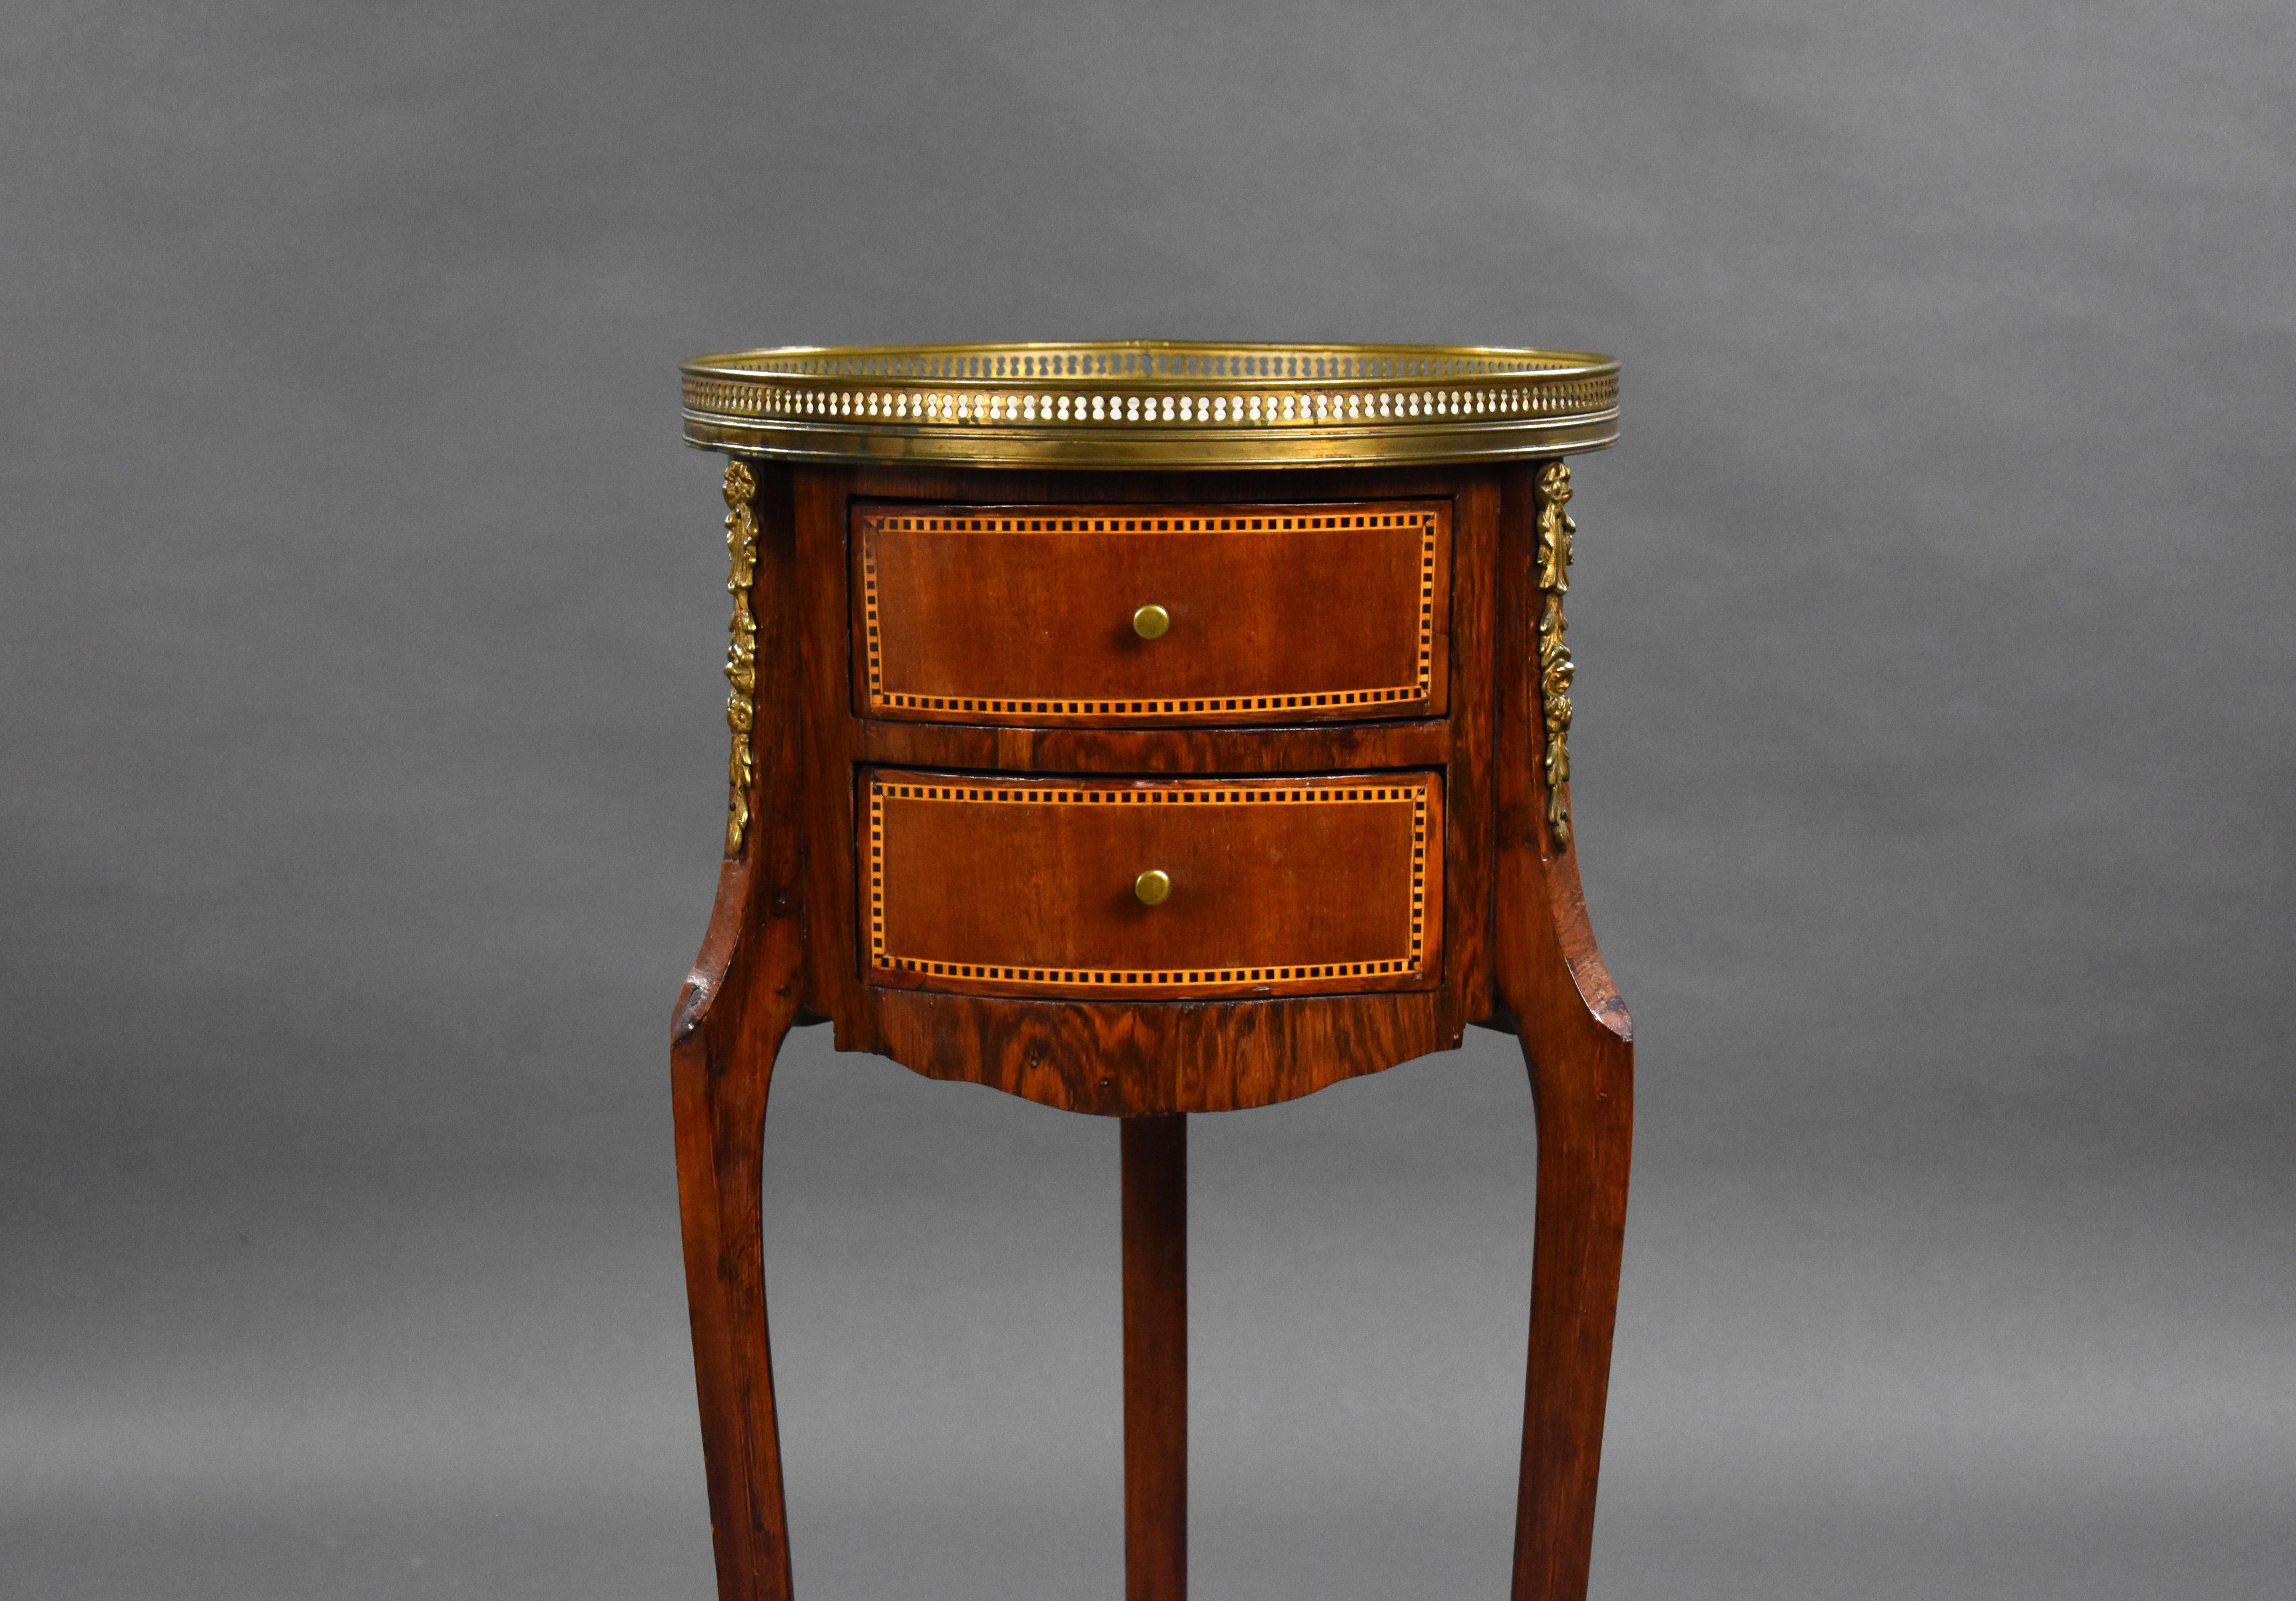 For sale is a good quality 19th century French parquetry inlaid cylinder side table, with a pierced brass gallery and a marble top, above two frieze drawers on brass mounted slender tripod supports. 

Measures: Width: 36cm Depth: 36cm Height: 77cm.